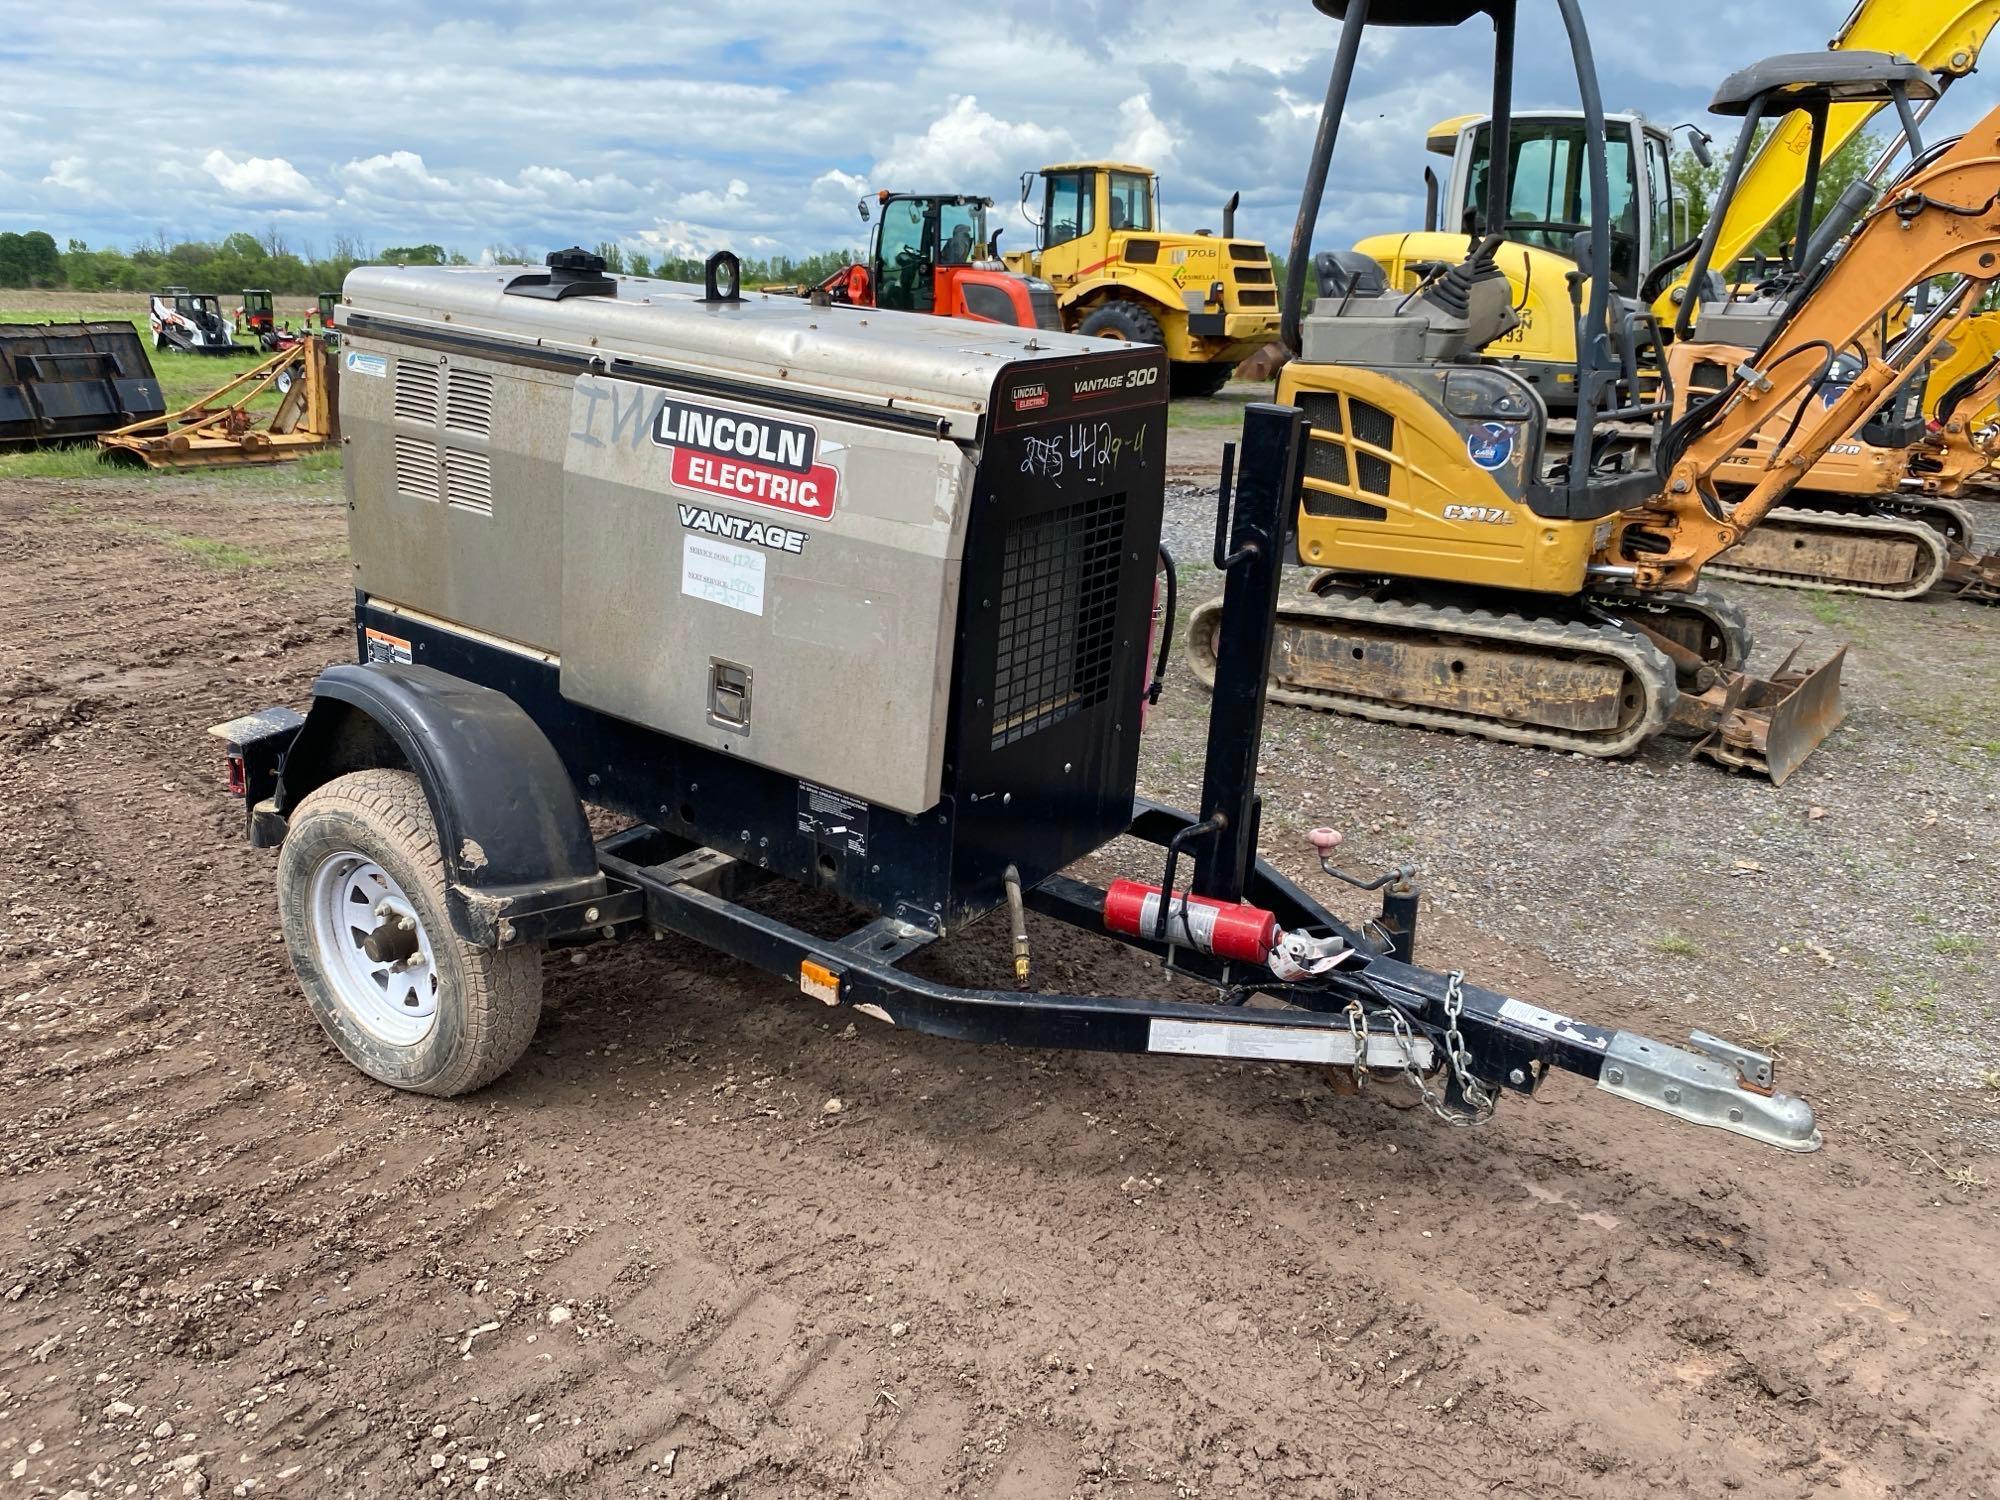 LINCOLN VANTAGE 300 WELDER SN:45 powered by Kubota diesel engine, trailer mounted.... BOS ONLY NO